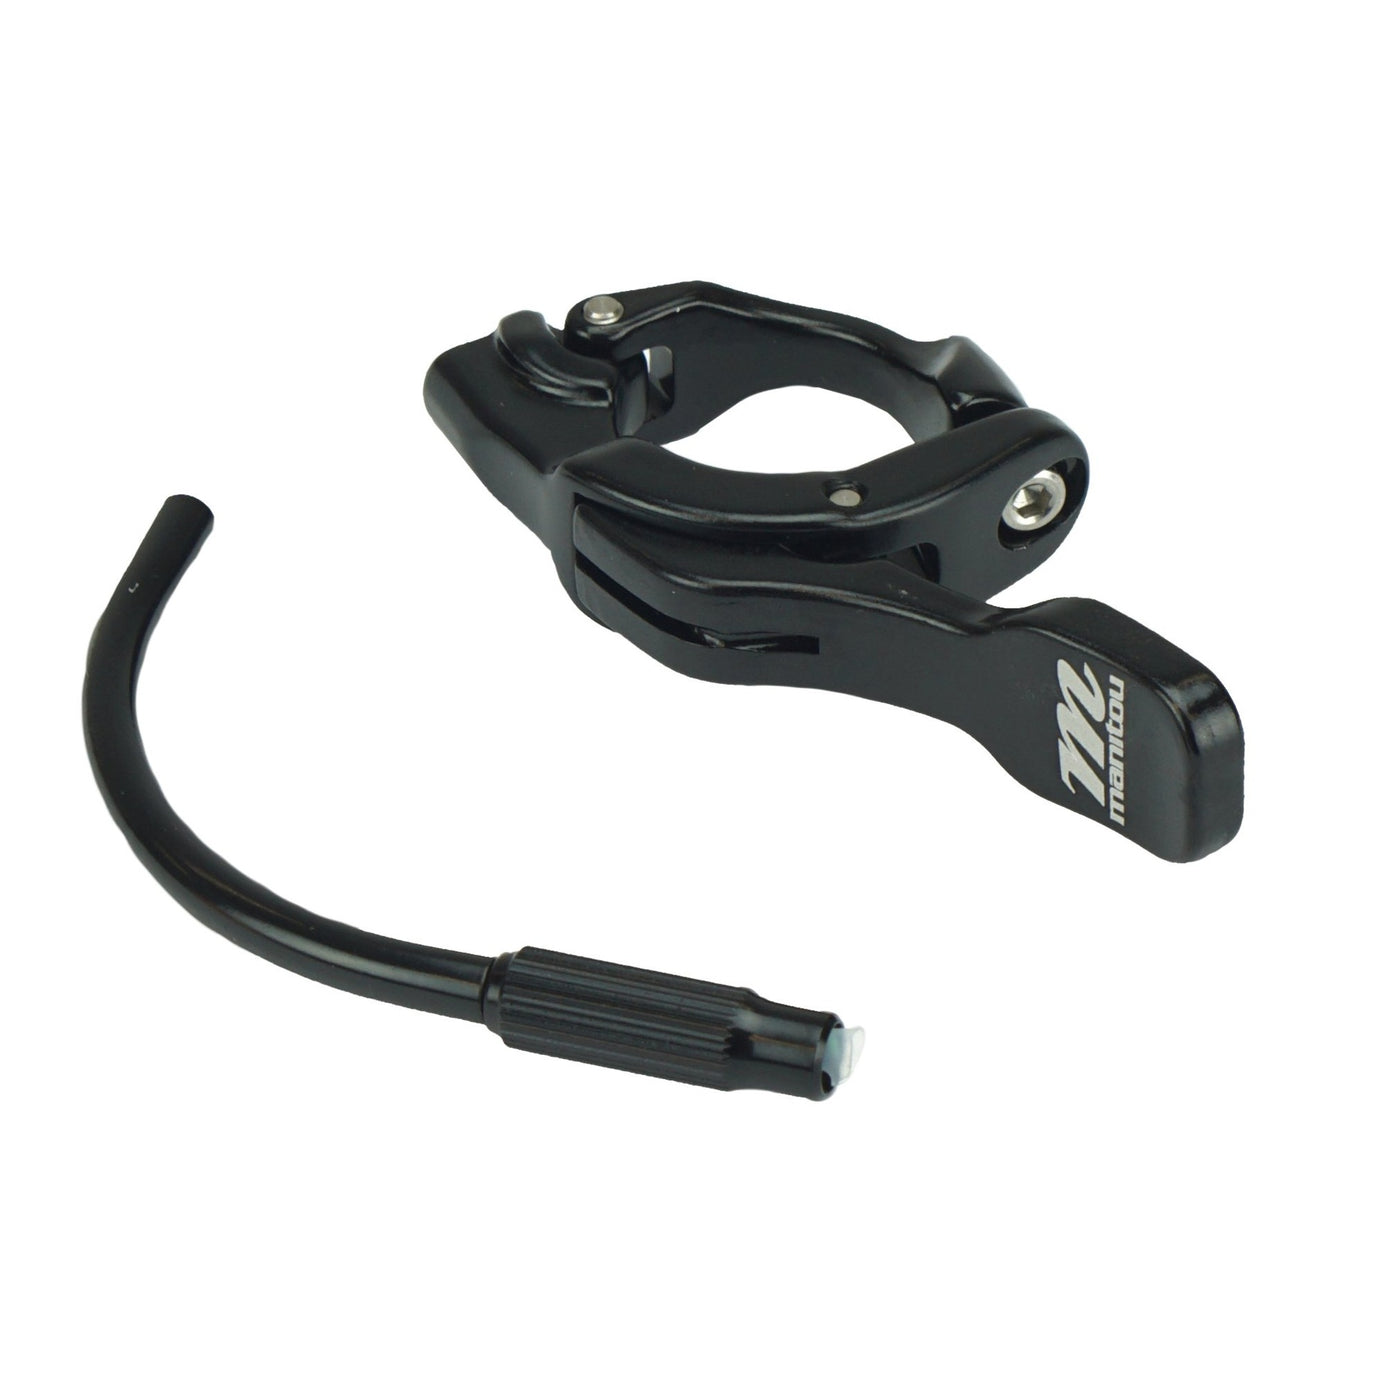 Manitou | Jack Dropper Seatpost Replacement Parts - Jack Above-Bar Trigger